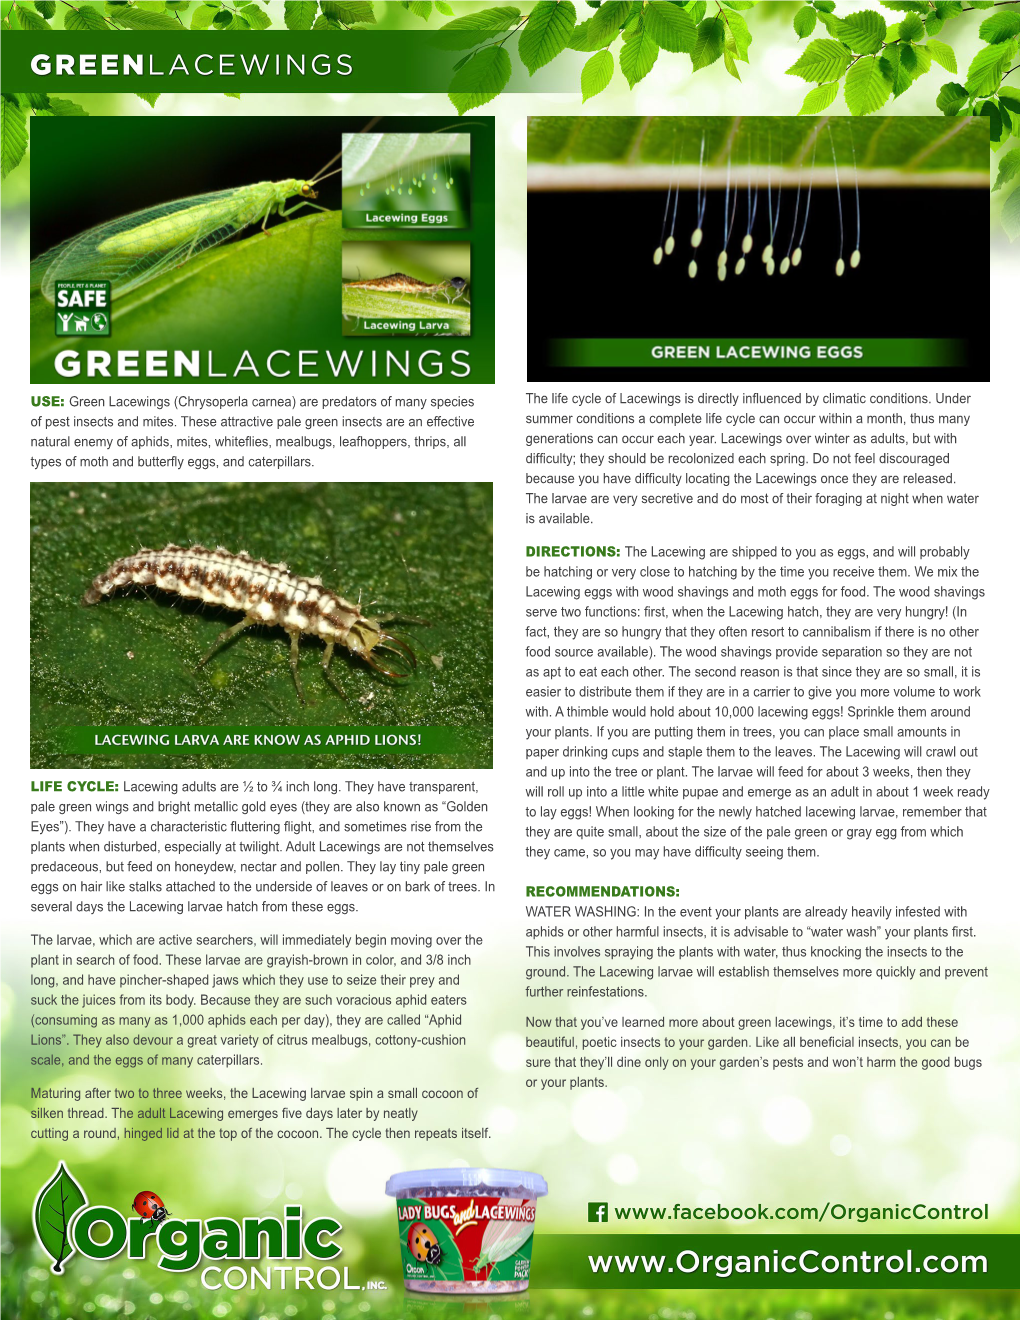 USE: Green Lacewings (Chrysoperla Carnea) Are Predators of Many Species the Life Cycle of Lacewings Is Directly Influenced by Climatic Conditions